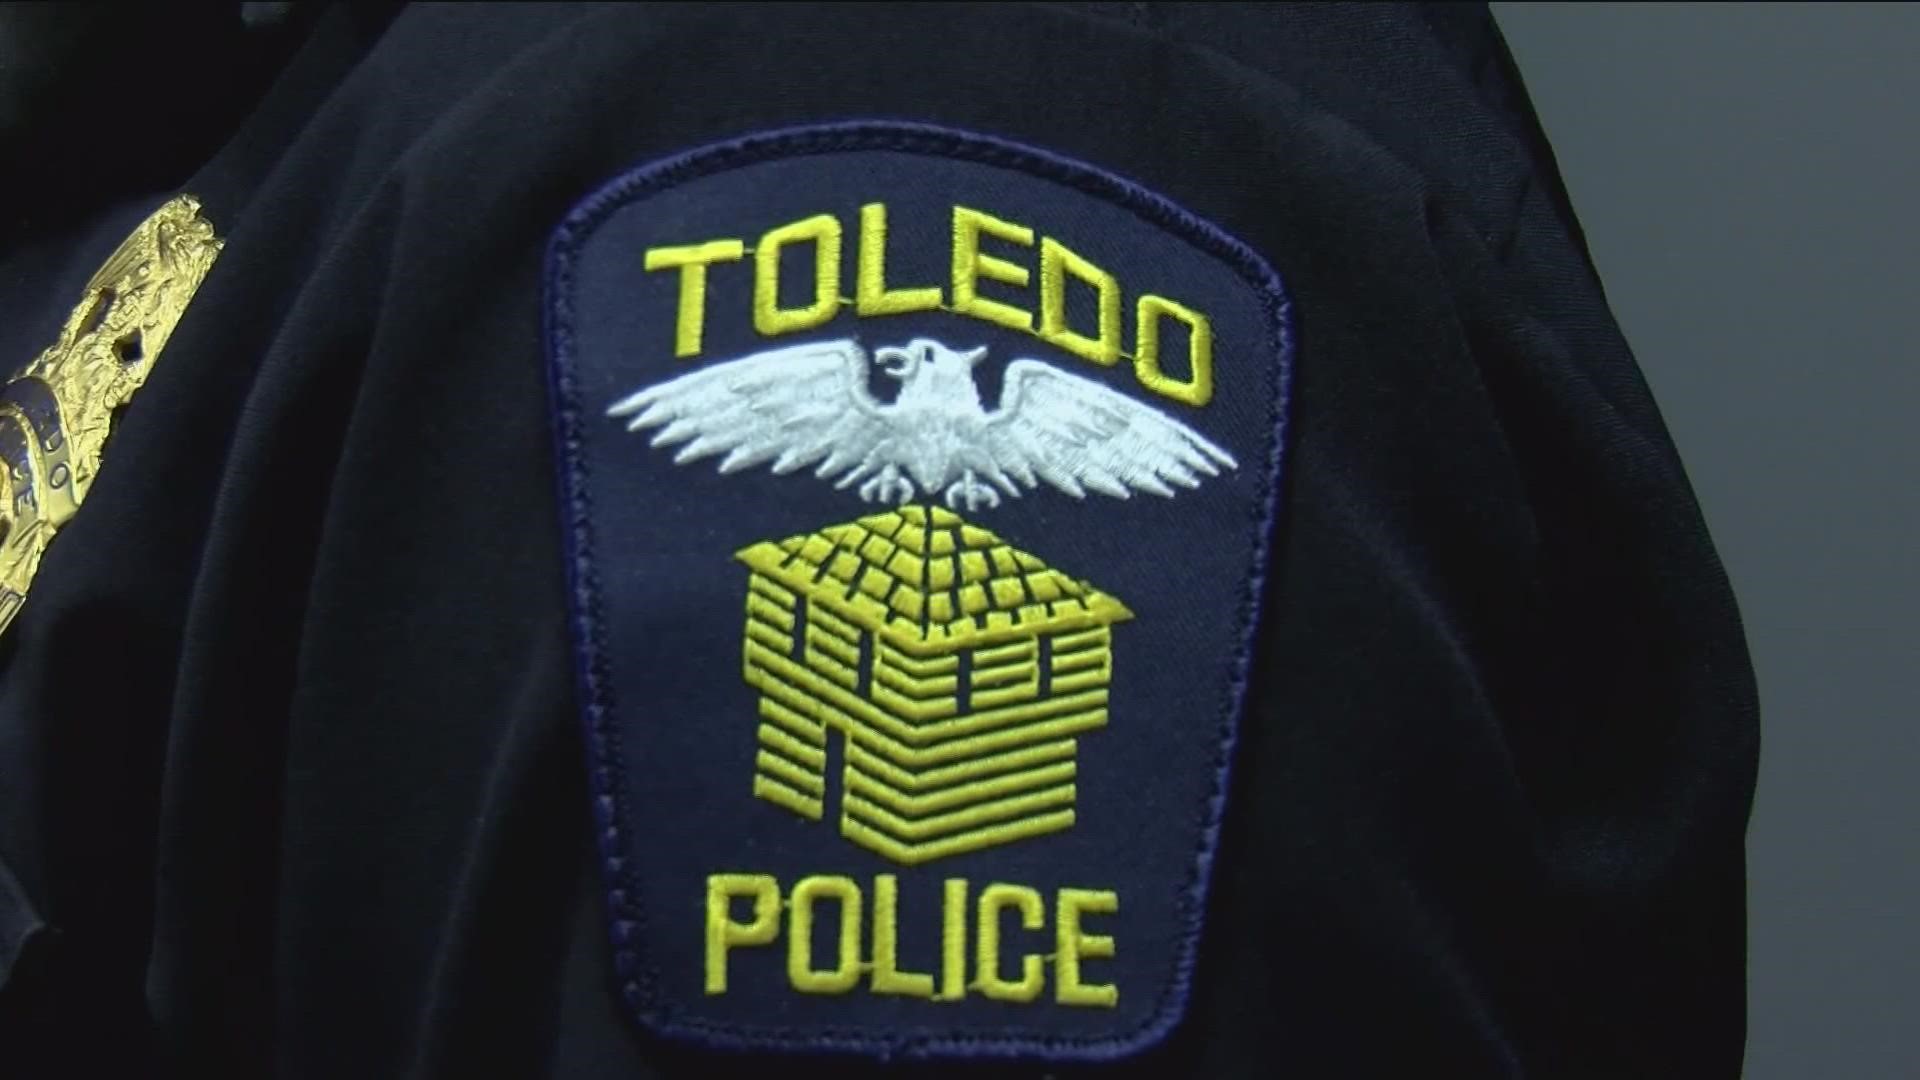 Toledo Mayor Wade Kapszukiewicz said he will announce the interim TPD chief Thursday morning. The search for the permanent chief has been underway.